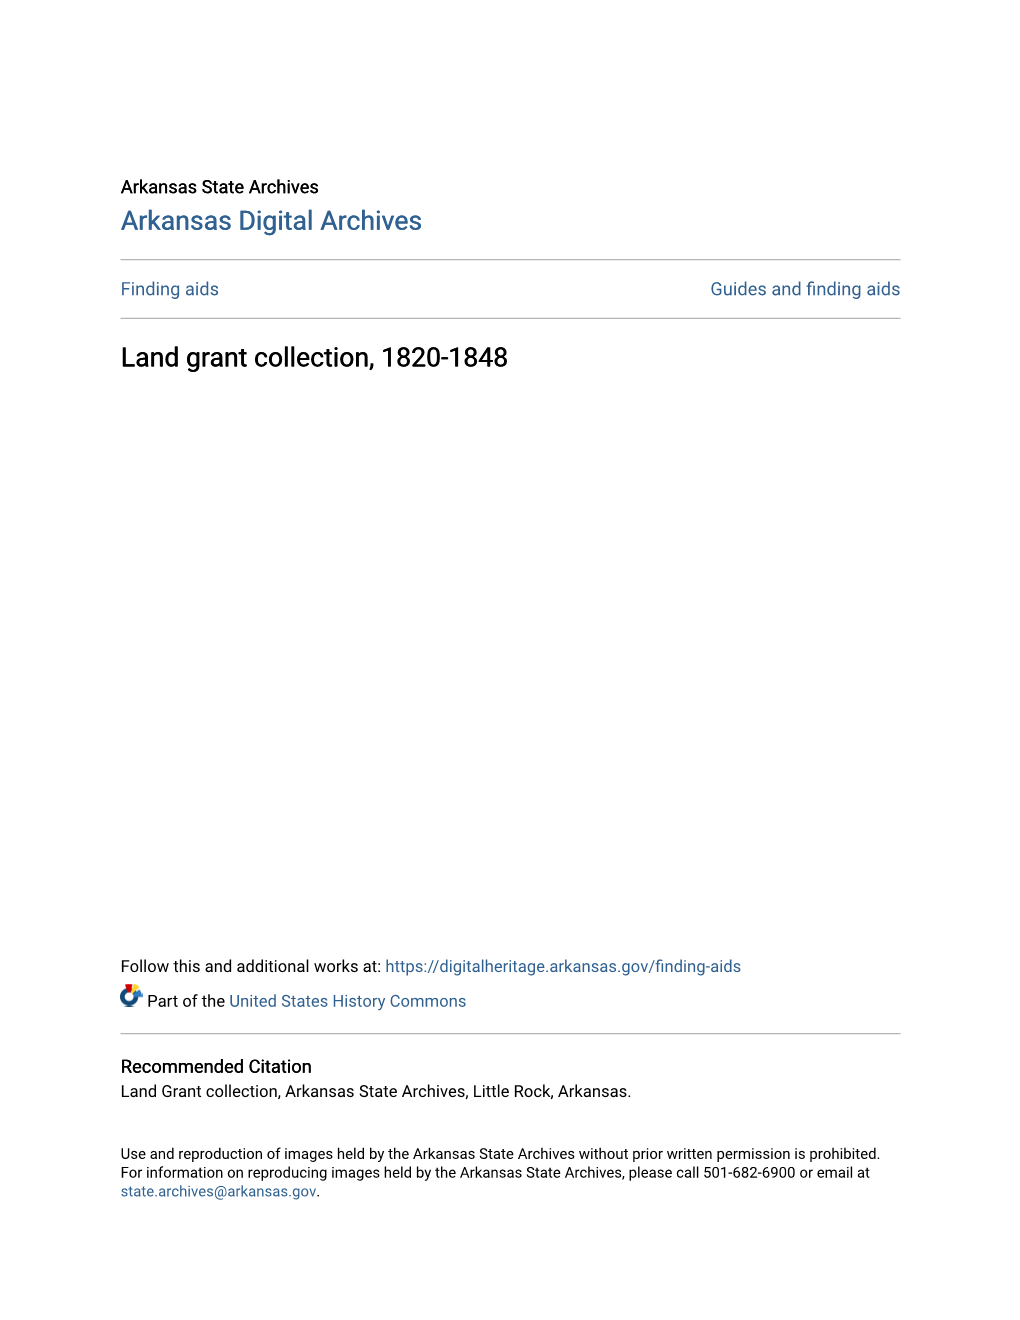 Land Grant Collection, 1820-1848